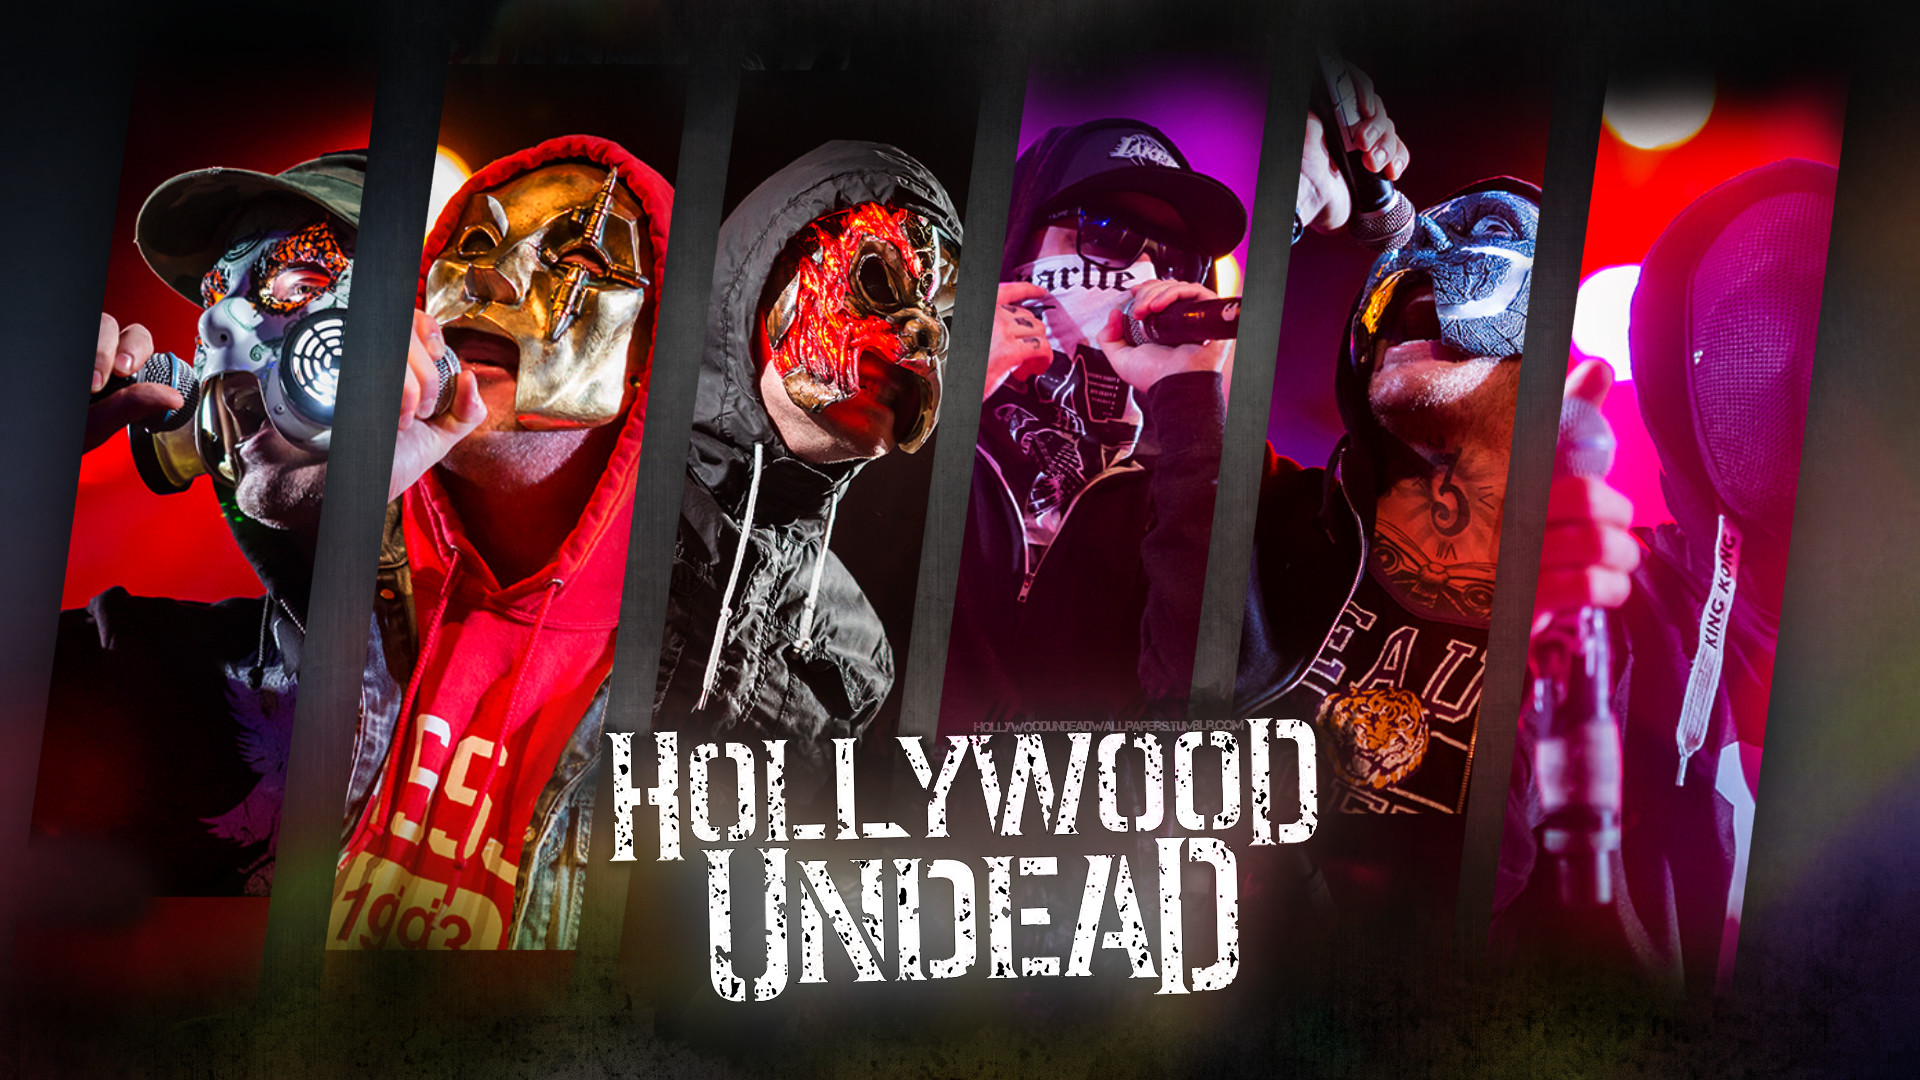 1920x1080, Hollywood Undead Wallpaper - Day Of The Dead - HD Wallpaper 